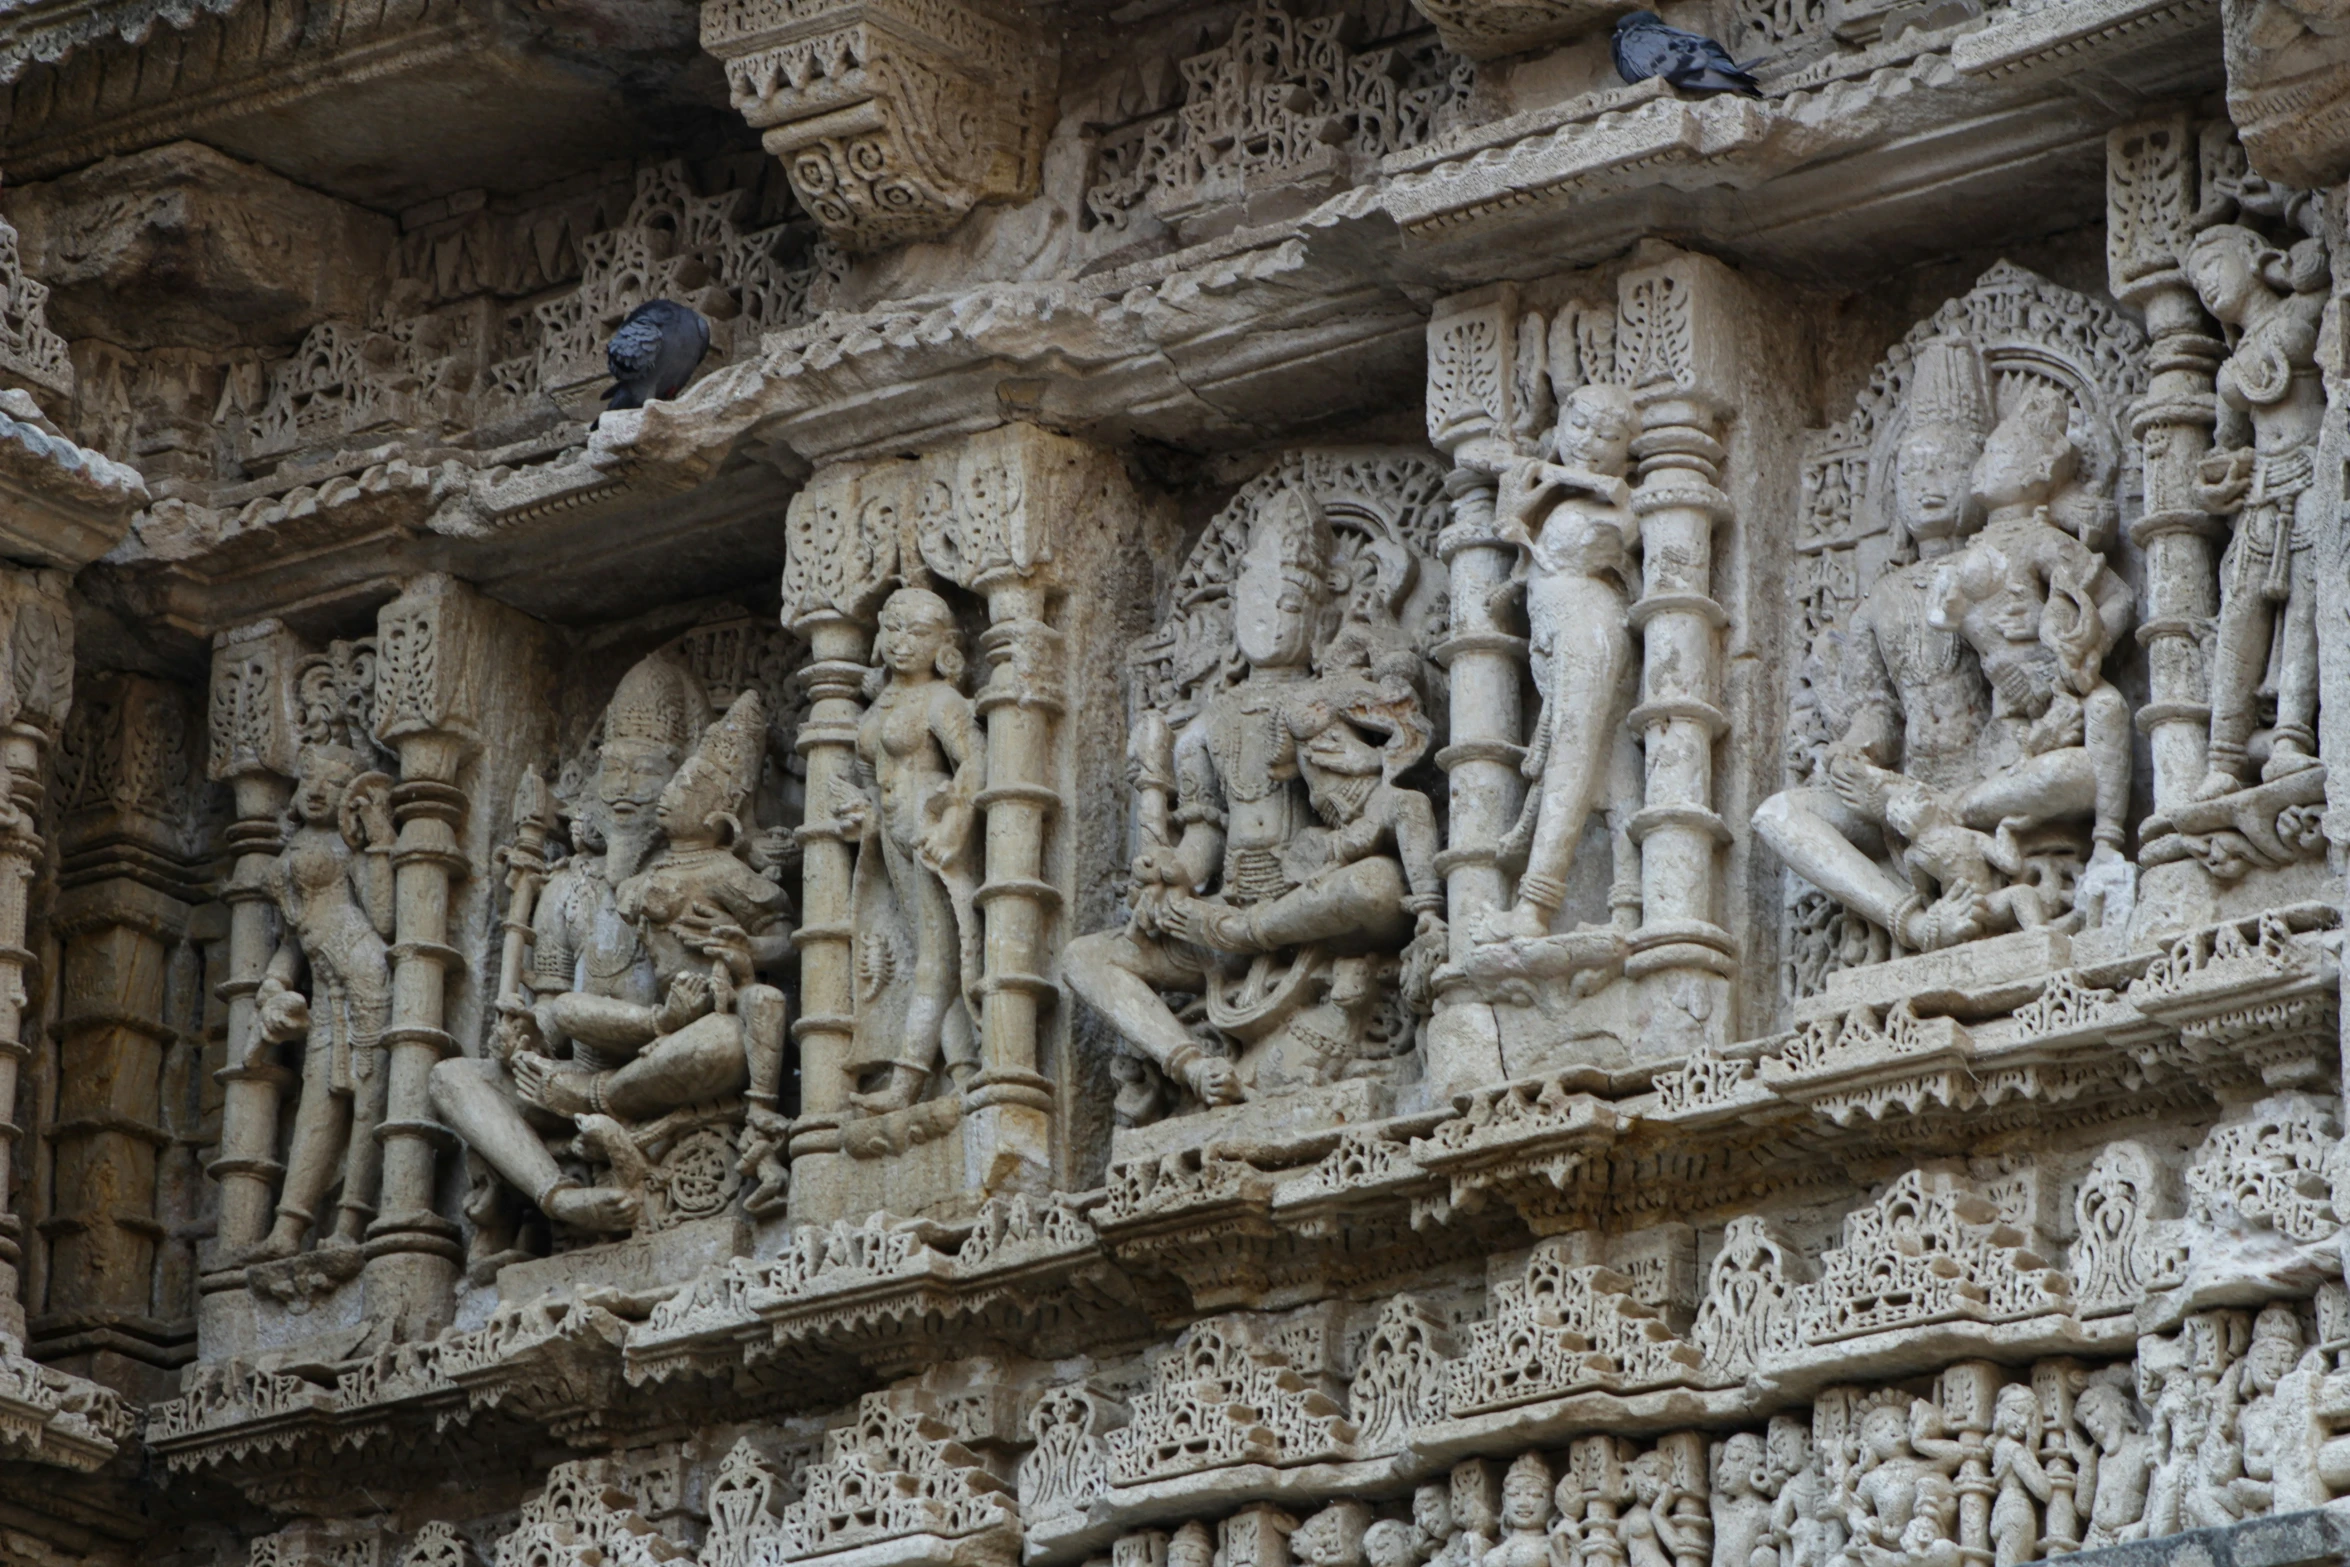 decorative carvings and sculpture displayed on the outer wall of a building